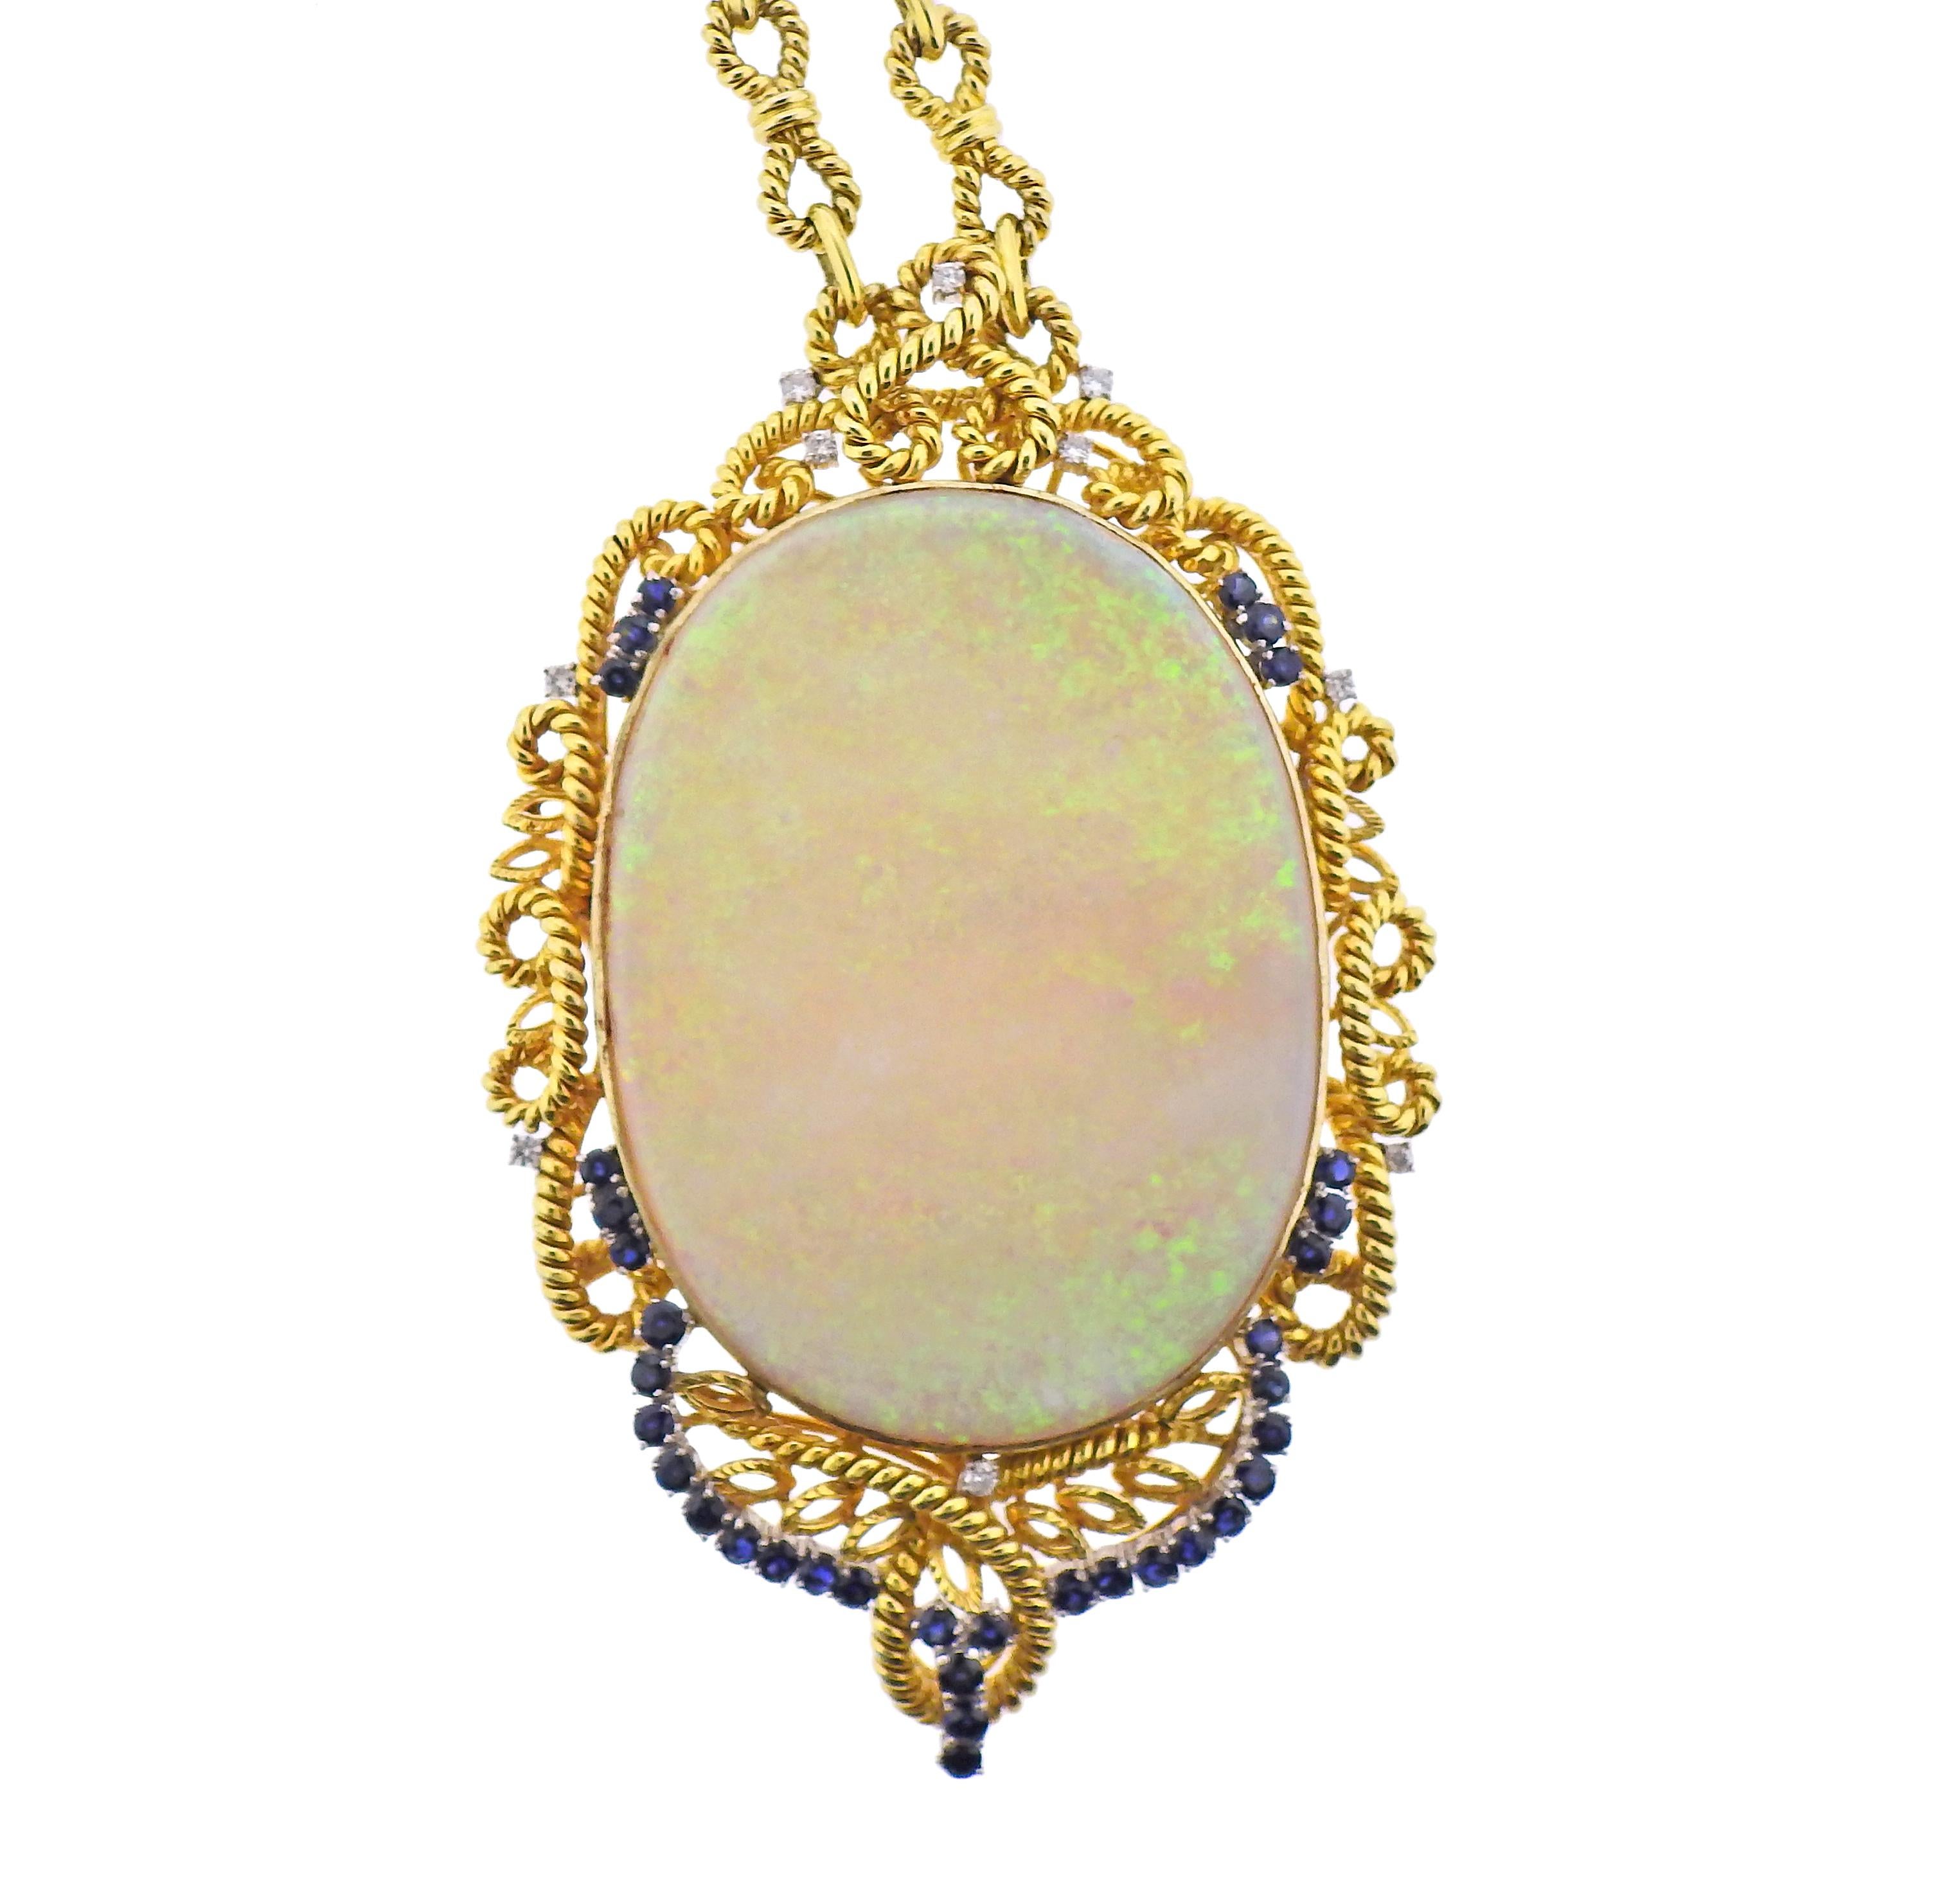 Massive 14k gold pendant necklace, featuring approx. 150ct opal (measures 74 x 55mm), surrounded with sapphires and approx. 0.50ctw in diamonds. Necklace is 29